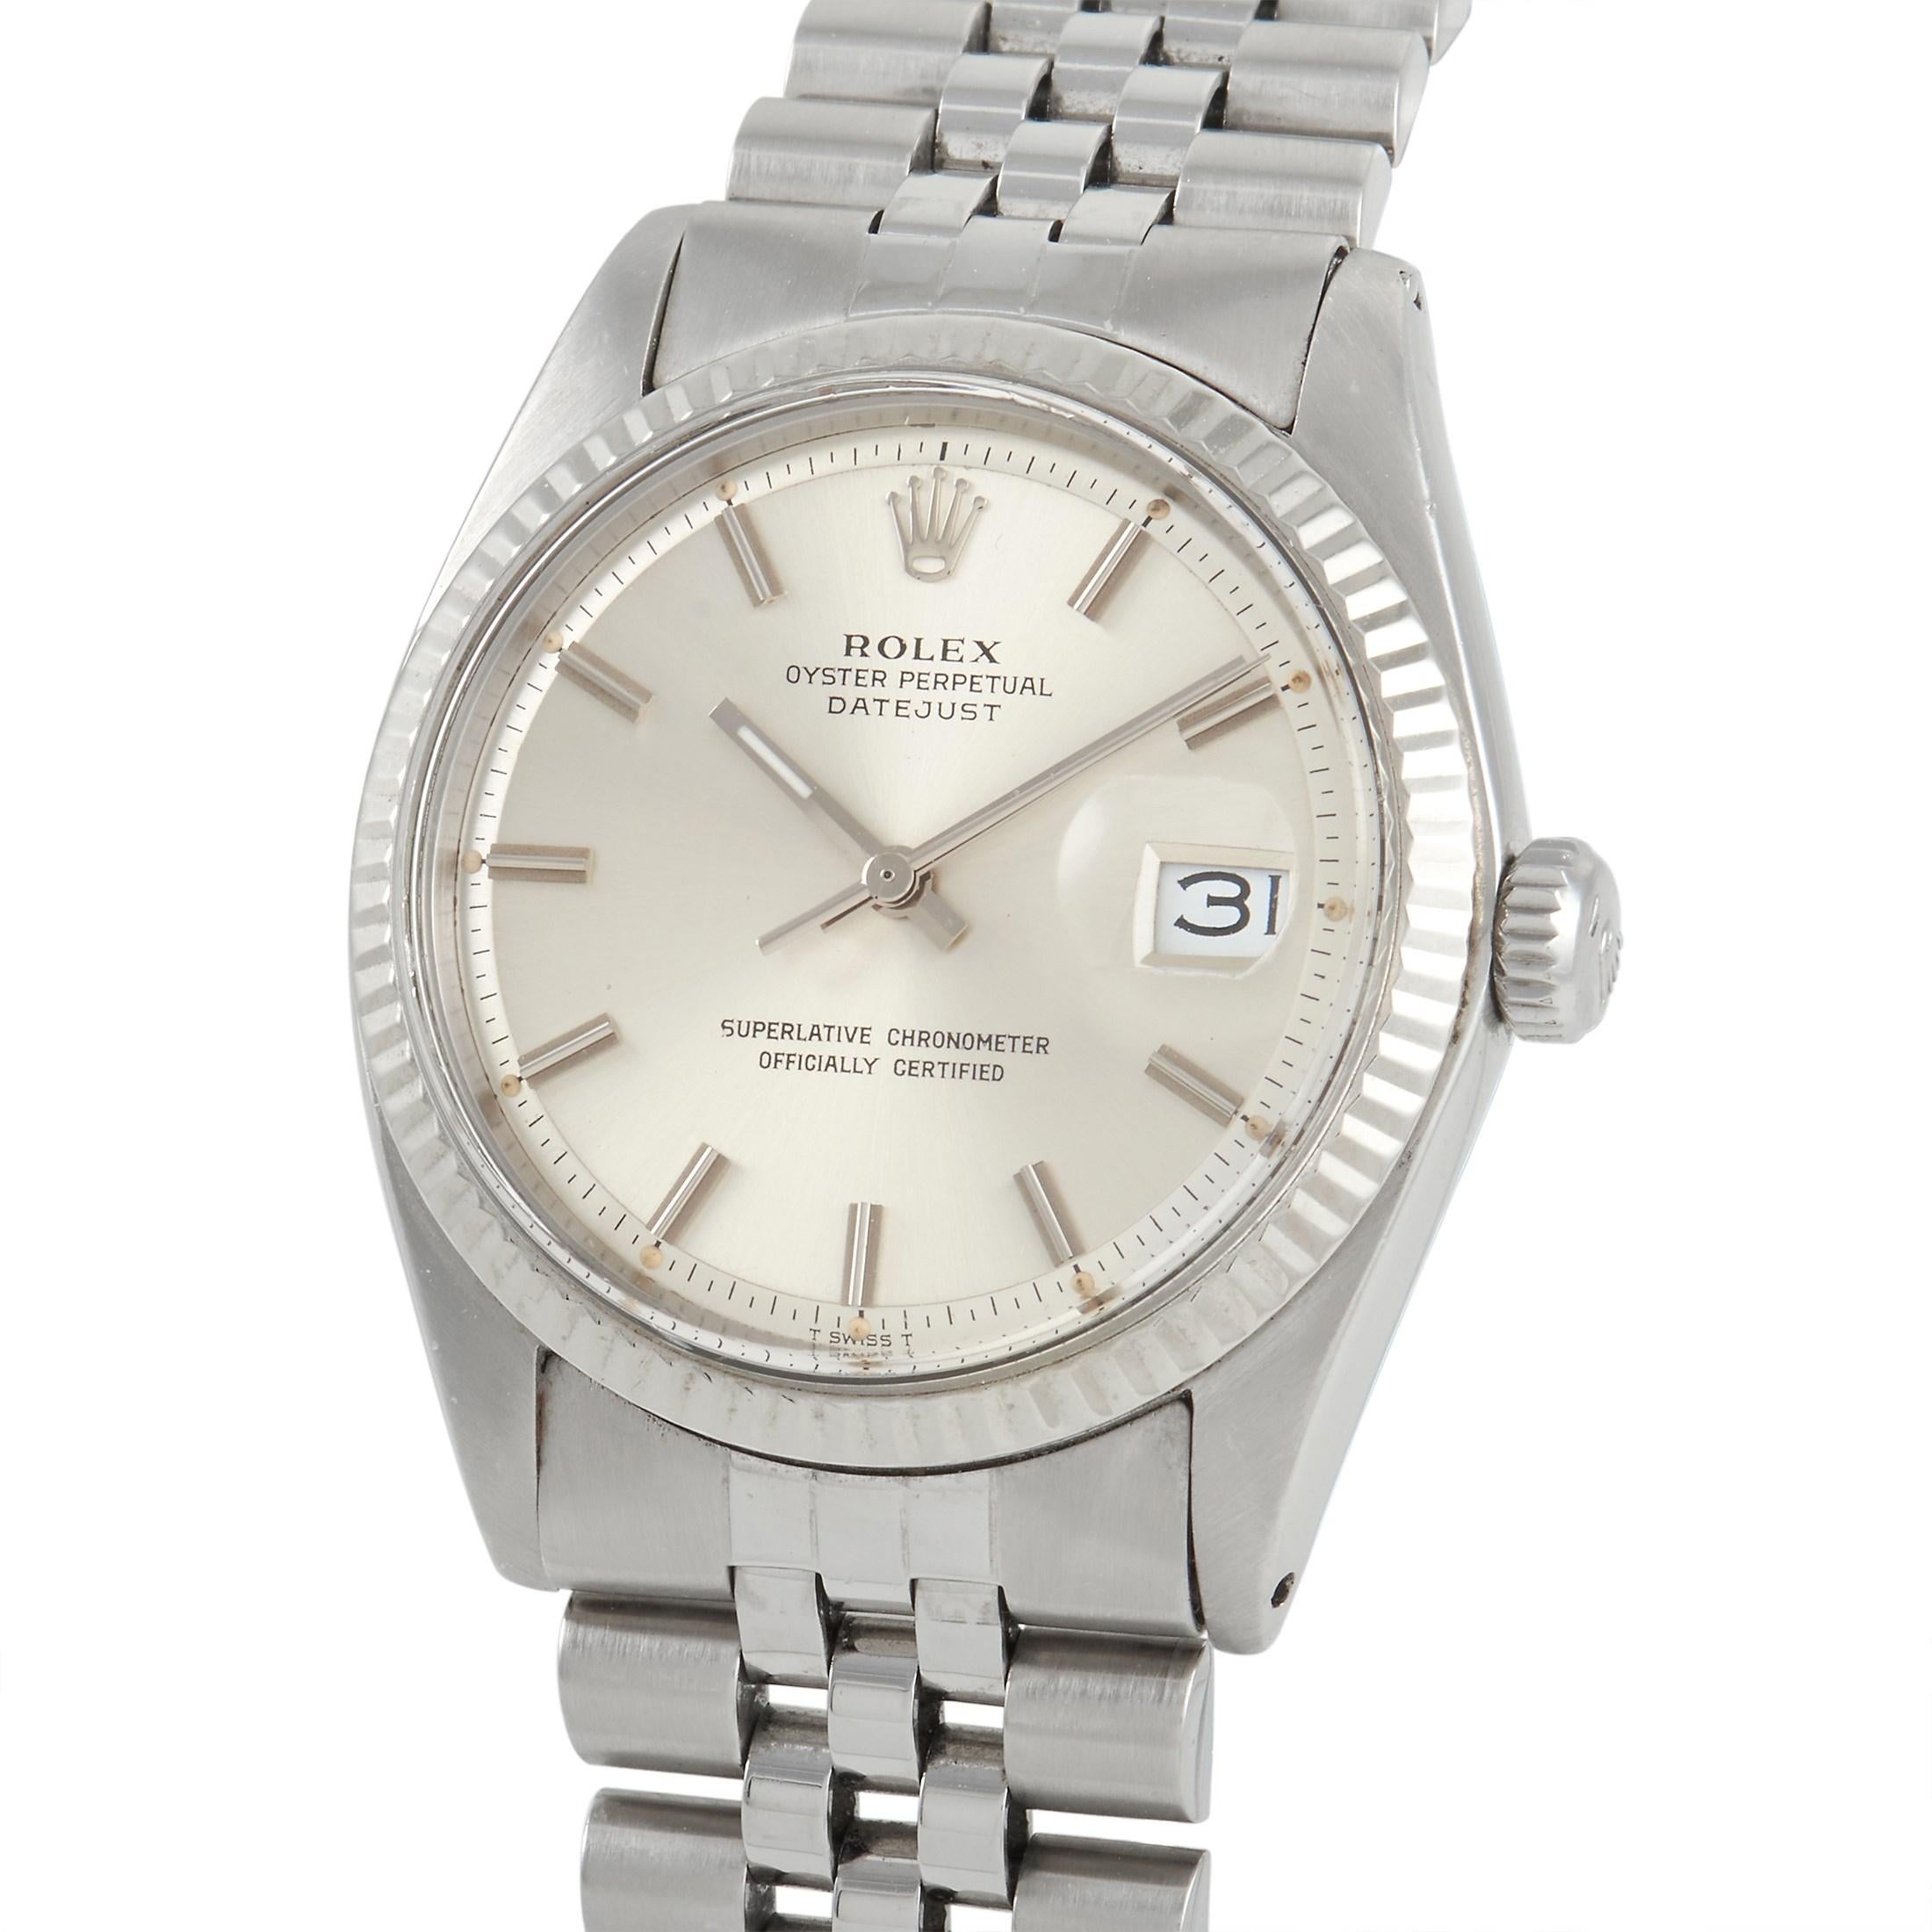 The Rolex Datejust Watch, reference number 1601, is sleek and sophisticated. 

This minimalist design begins with a 36mm case made from stylish 18K White Gold, which beautifully complements the Stainless Steel bracelet with clasp closure. A fluted